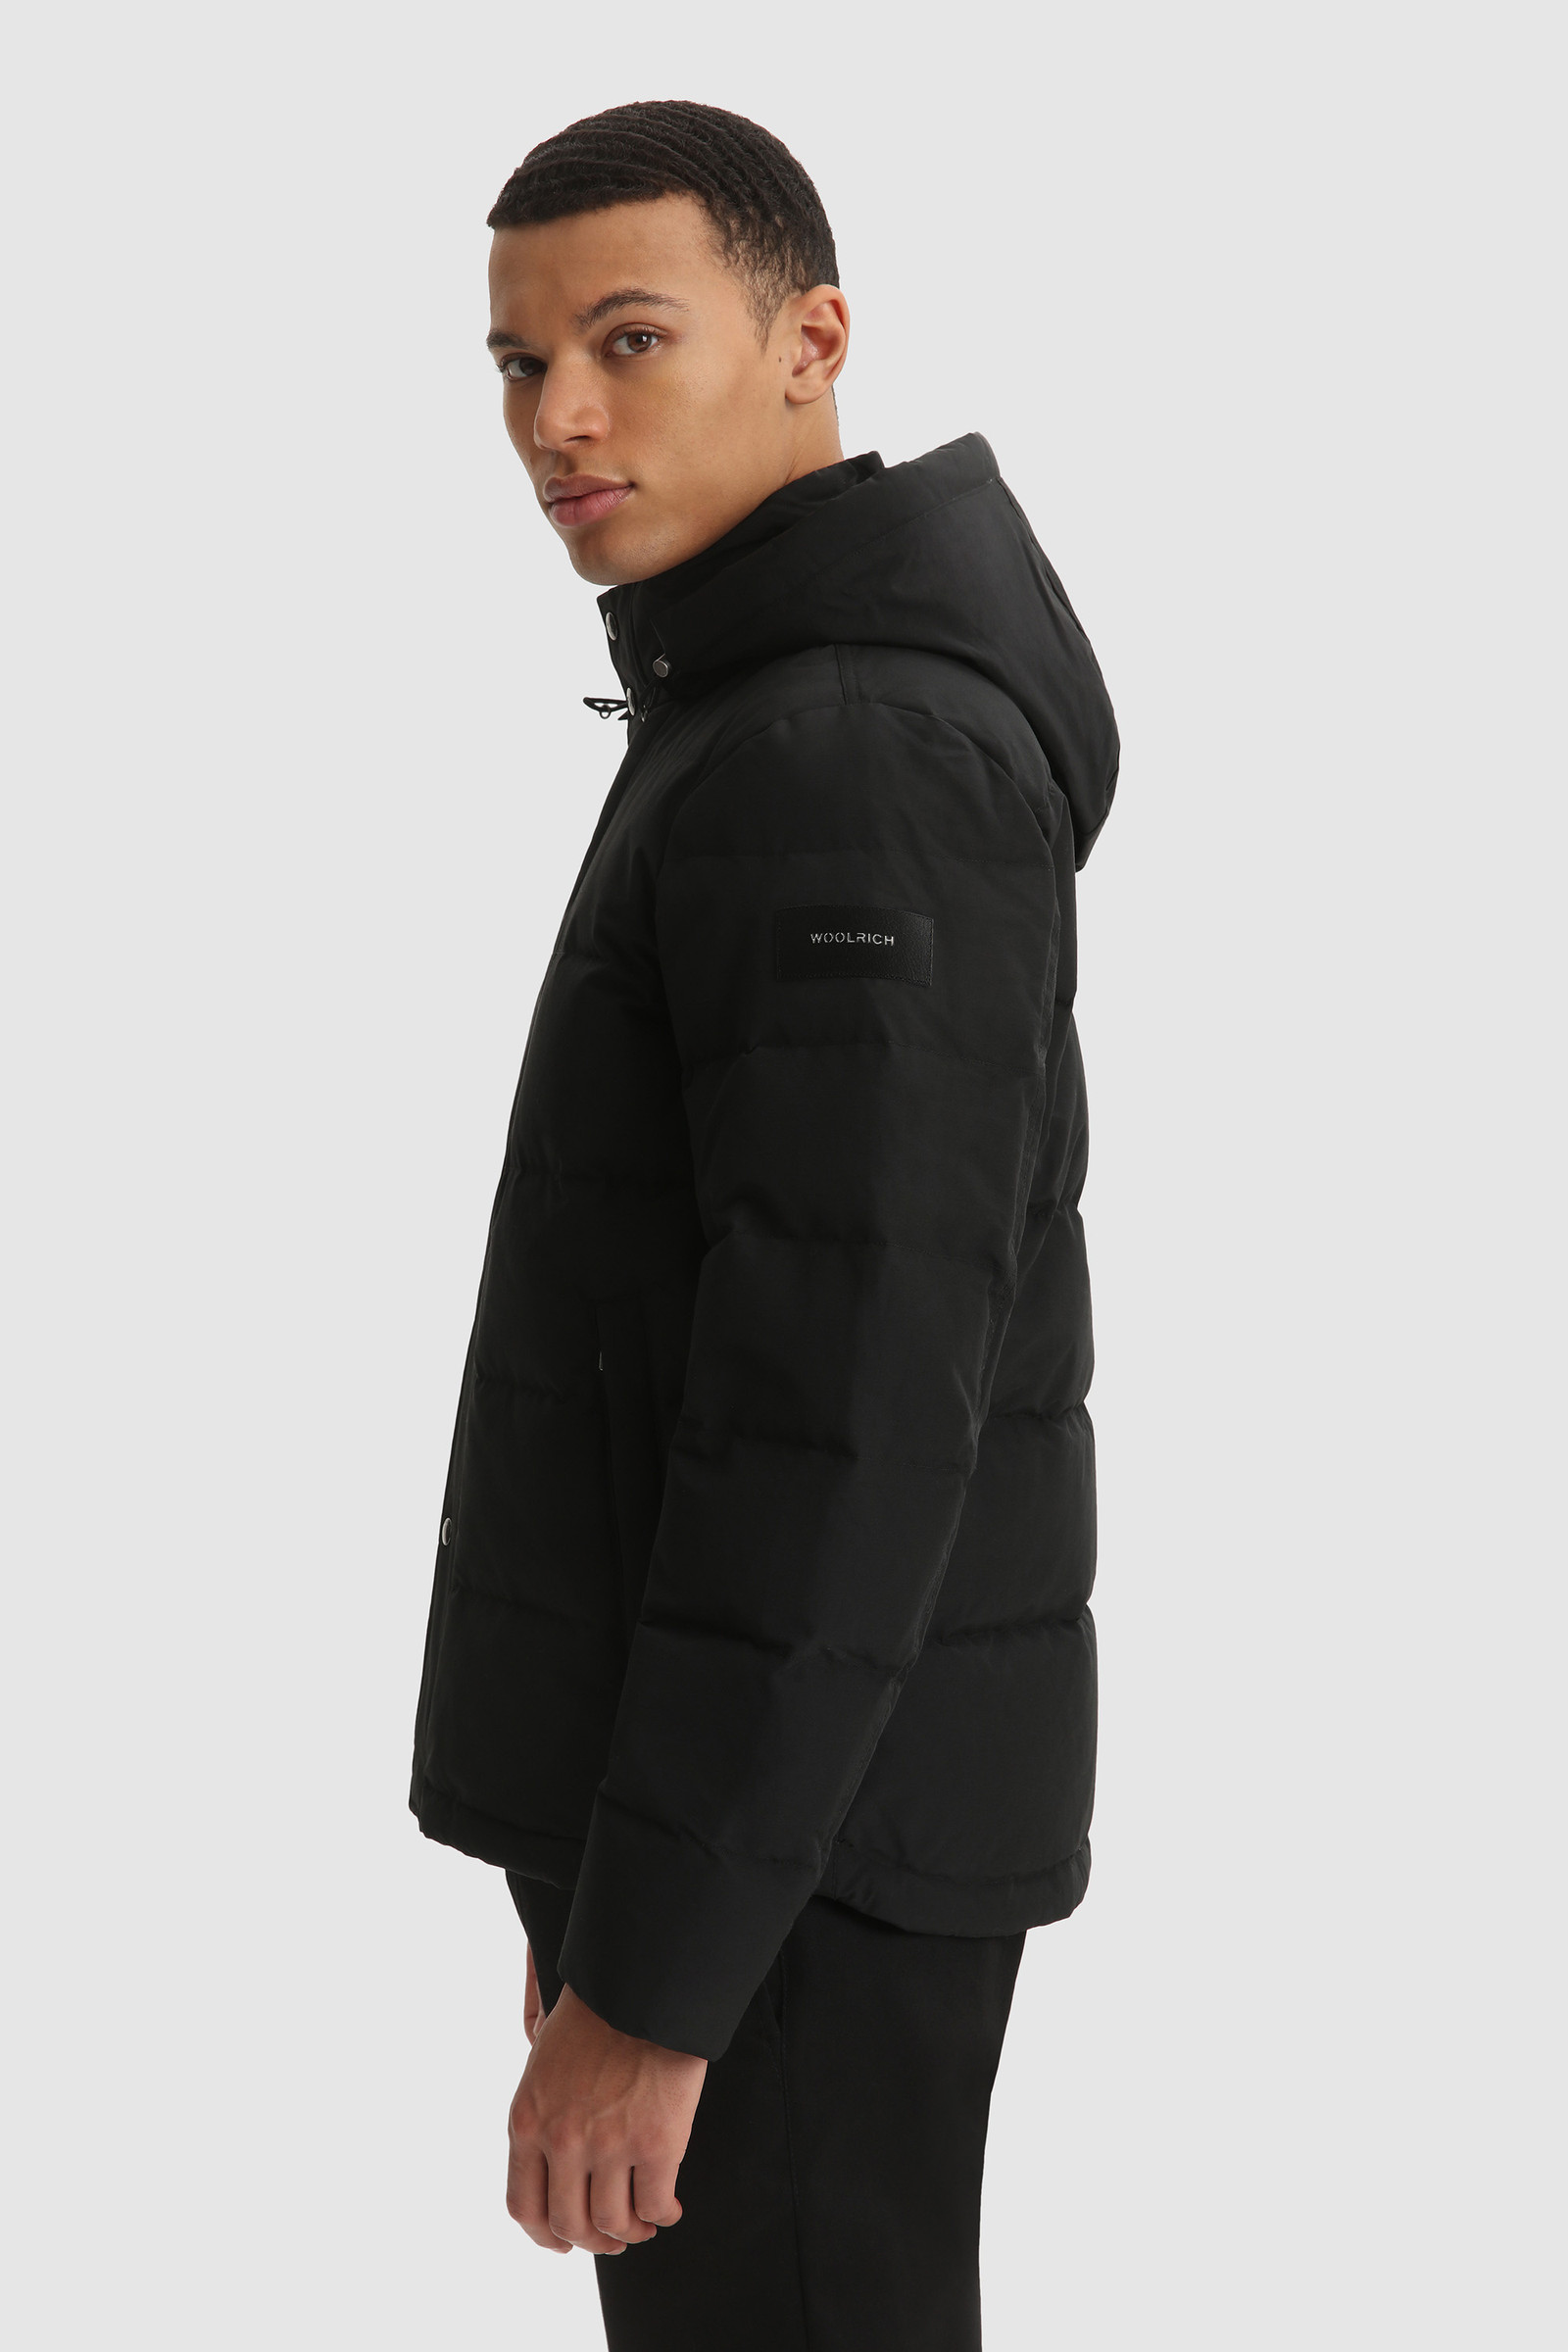 Sierra Green Jacket in Organic Cotton and Recycled Nylon - Men - Black